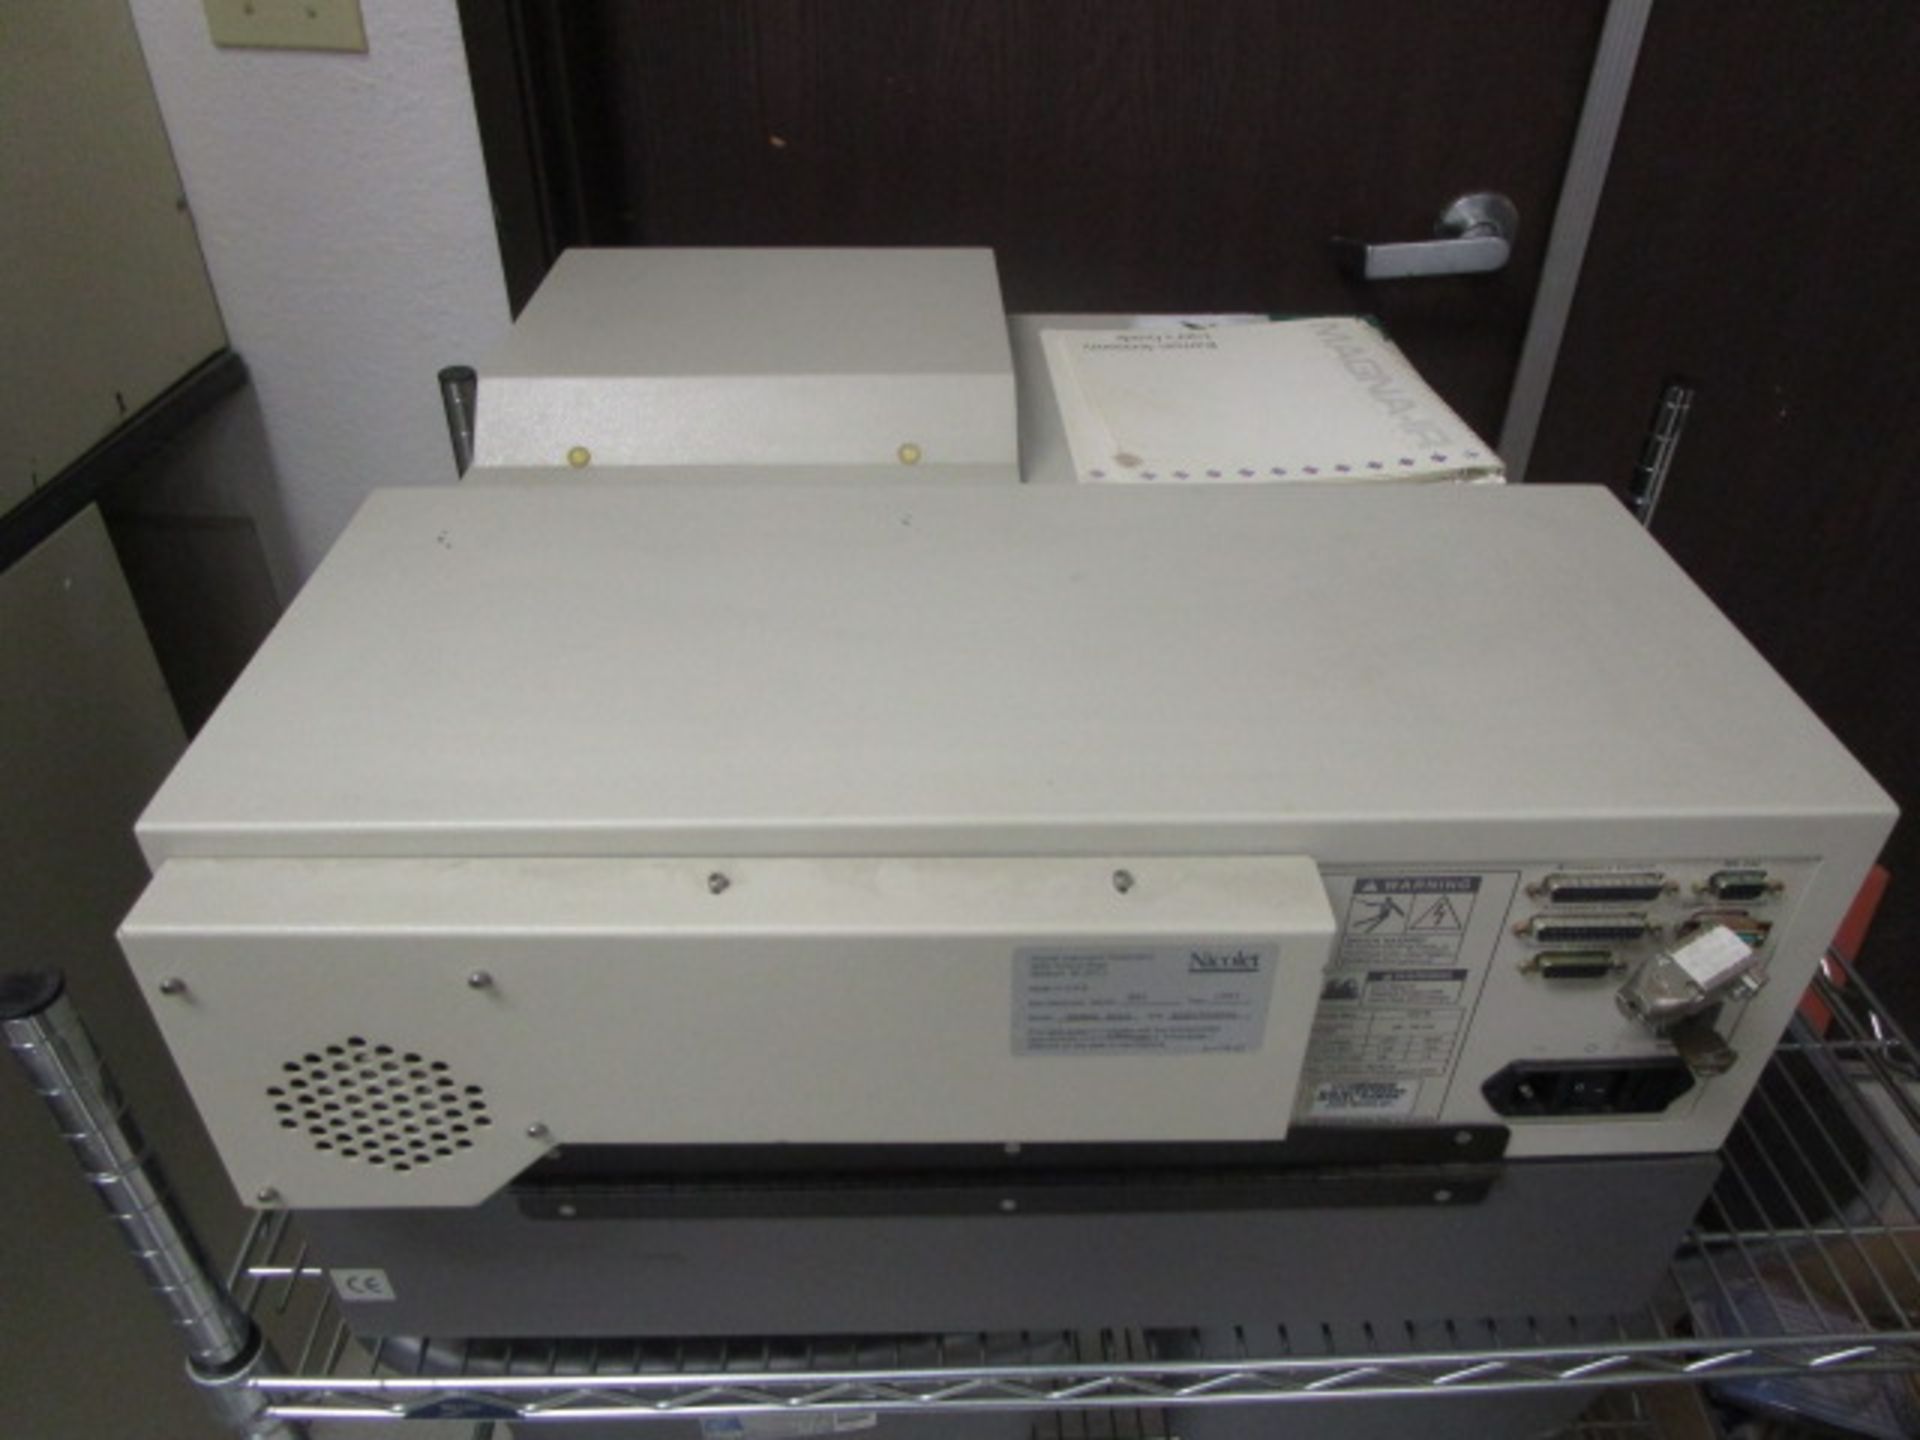 Nicolet Magna- IR 560 Spectromer E.S.P. to include software tutorial, and "32 bit" SW. Near and - Image 29 of 31